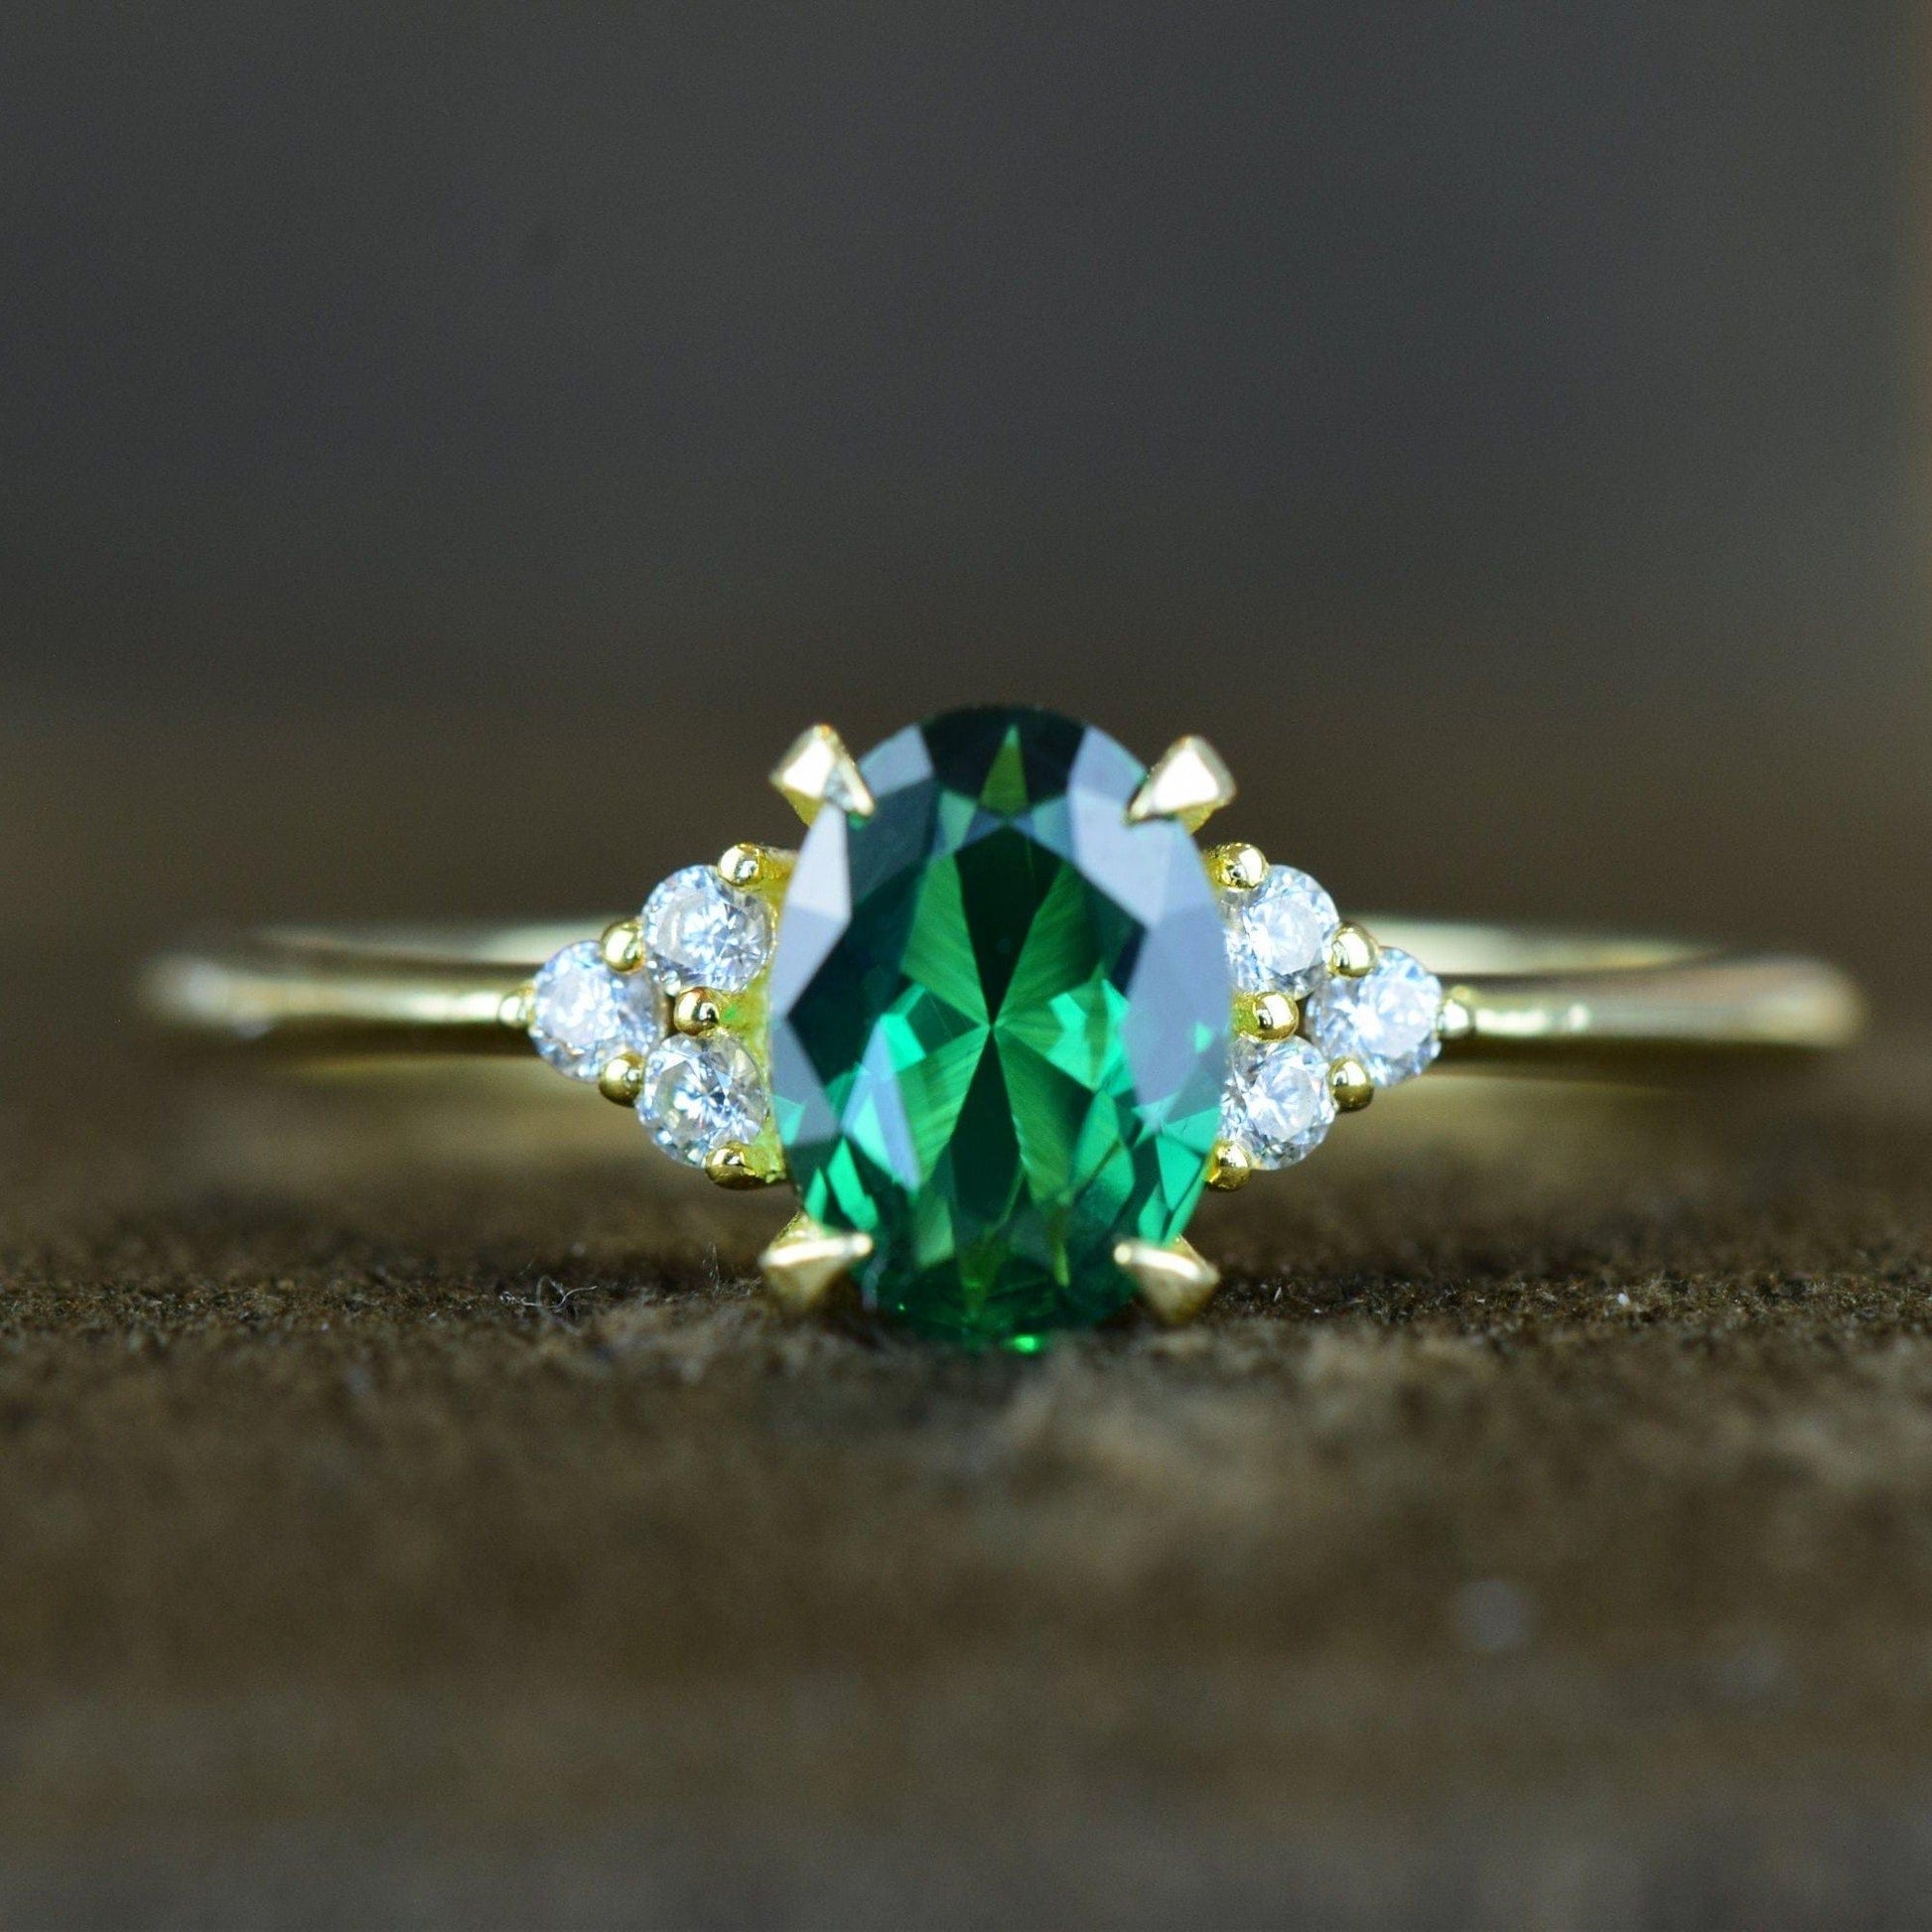 Oval Cut Emerald Gold Engagement Dainty Emerald Anniversary Ring Gift For Her - JBR Jeweler